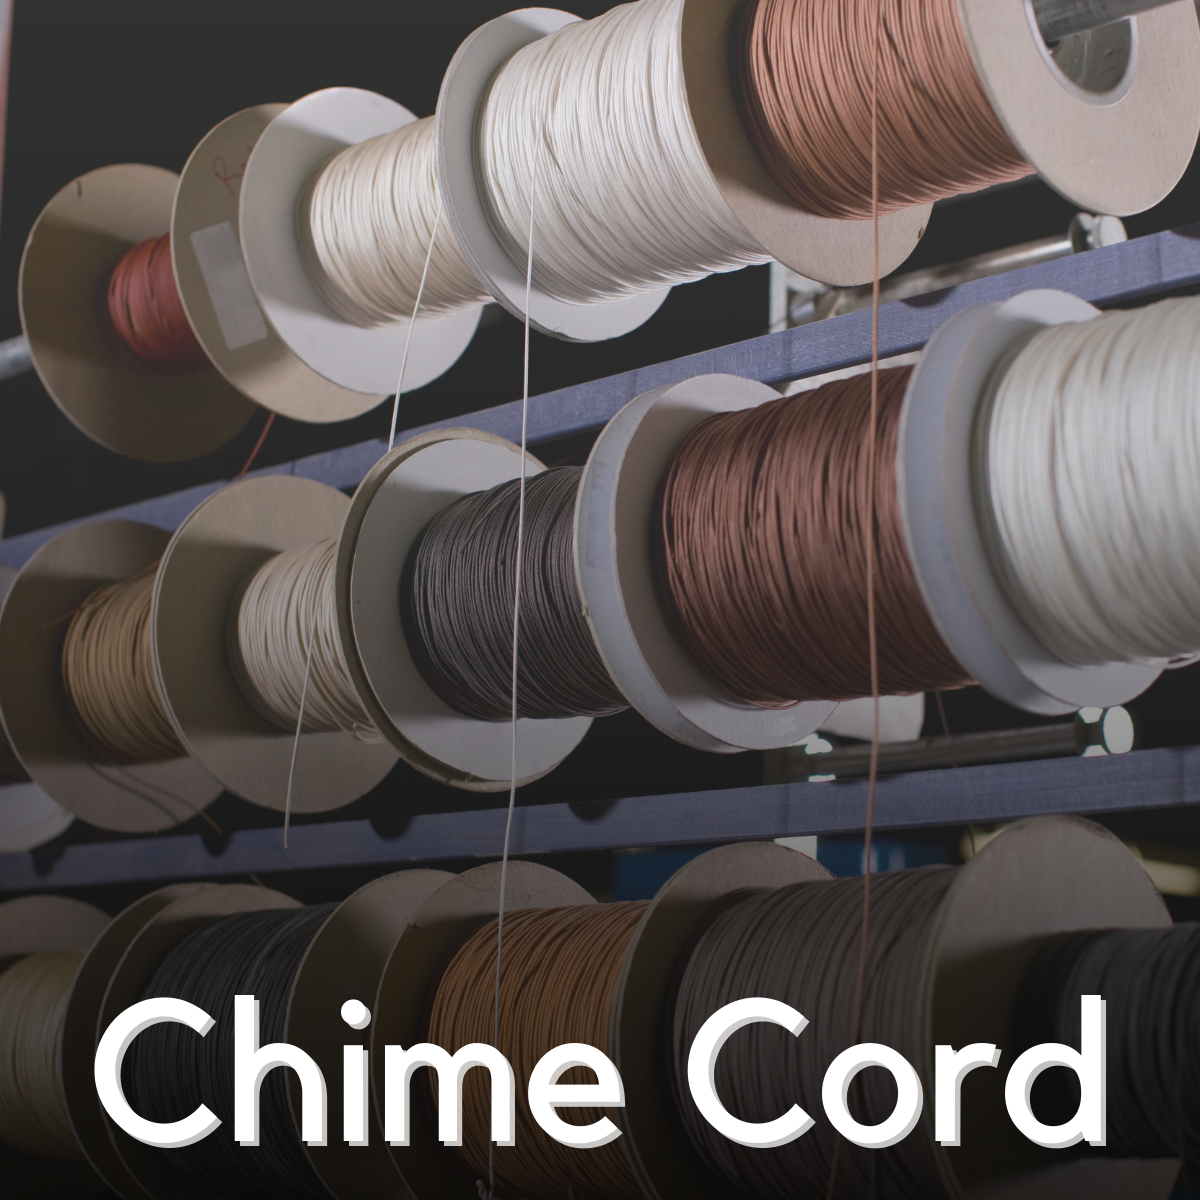 Wind Chime Repair: Chords & Strings for All Chimes